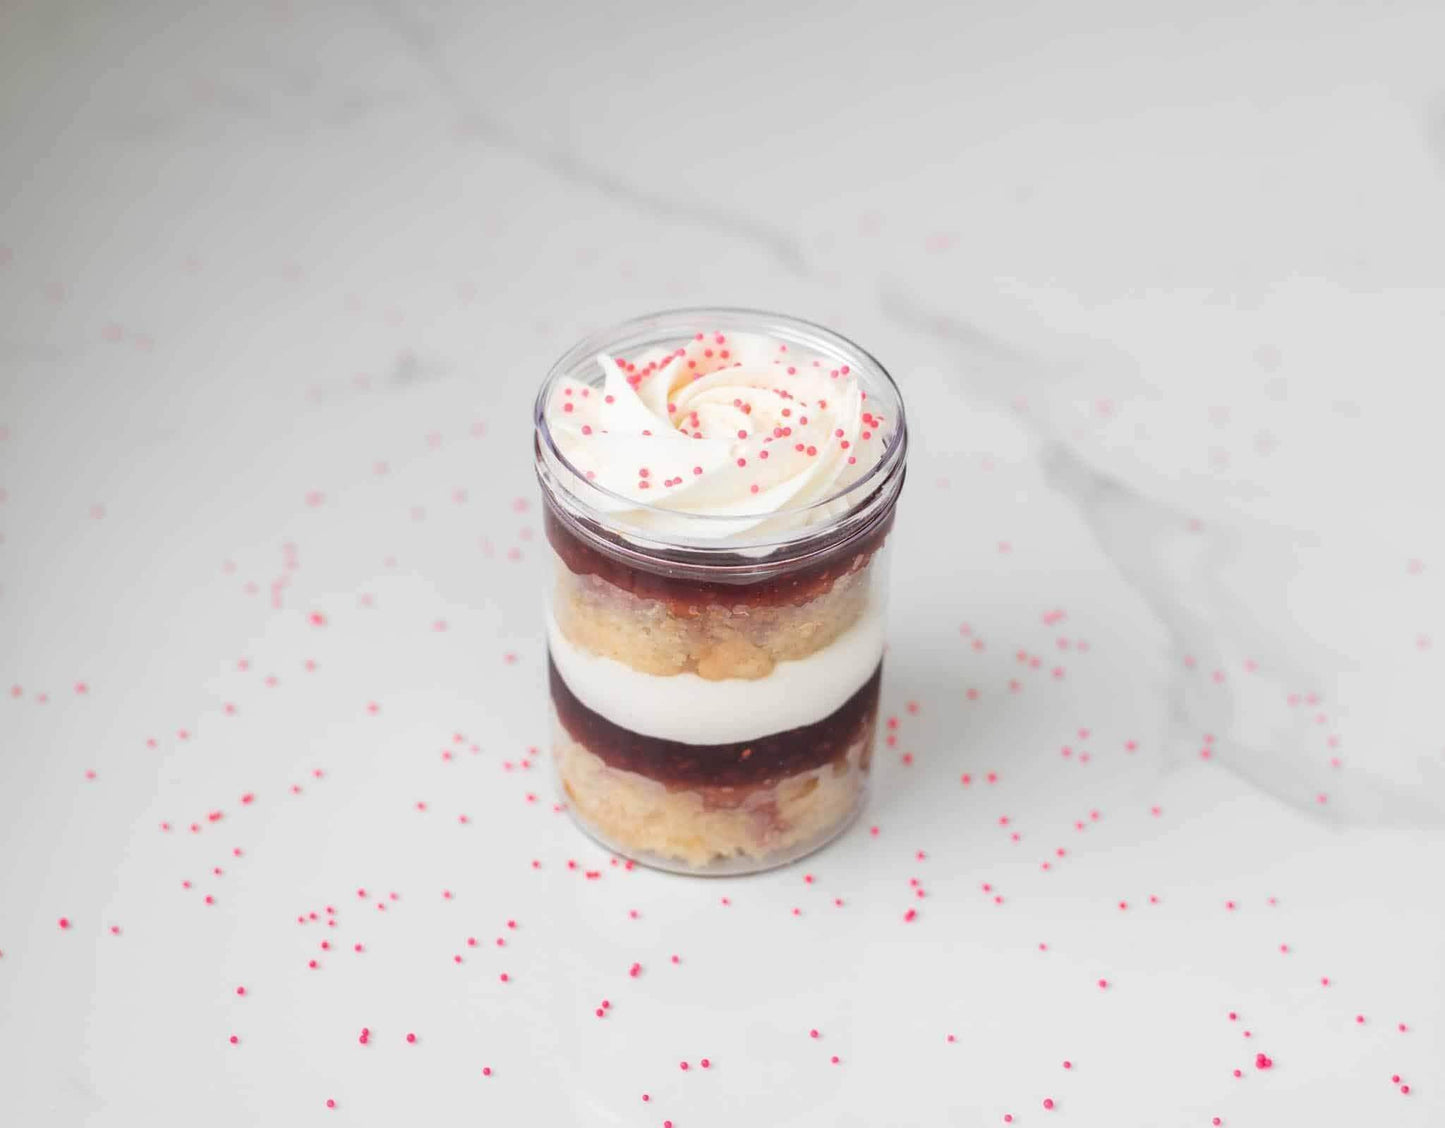 Vanilla Raspberry Cake In A Jar Bakery near me Bakeries near me Cake near me Gluten free bakery Best bakery near me Vegan bakery online Gluten-free dessert delivery Vegan cakes for sale Gluten-free cookies online Vegan cupcakes delivery Dairy-free bakery